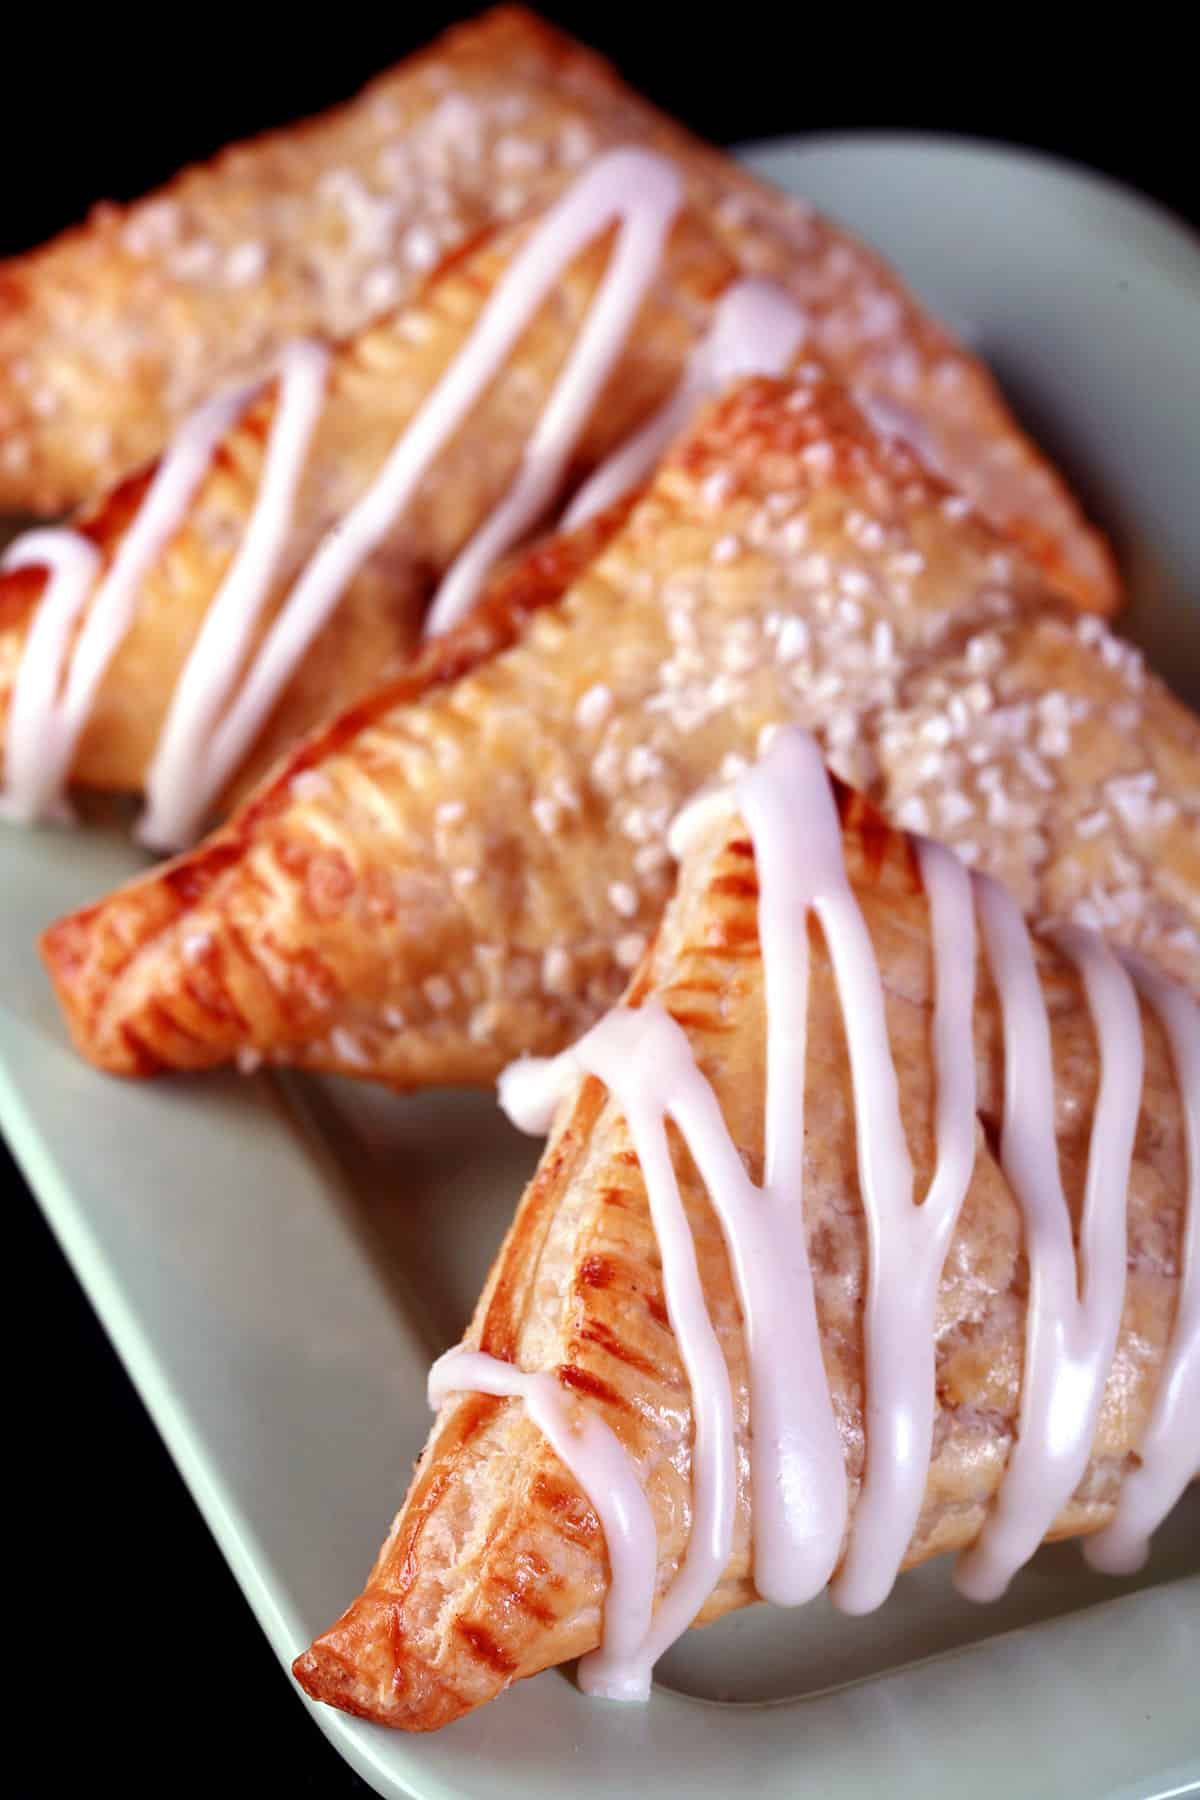 A plate of homemade apple turnovers, some with a drizzled glaze, the rest wth a chunky sugar crust.